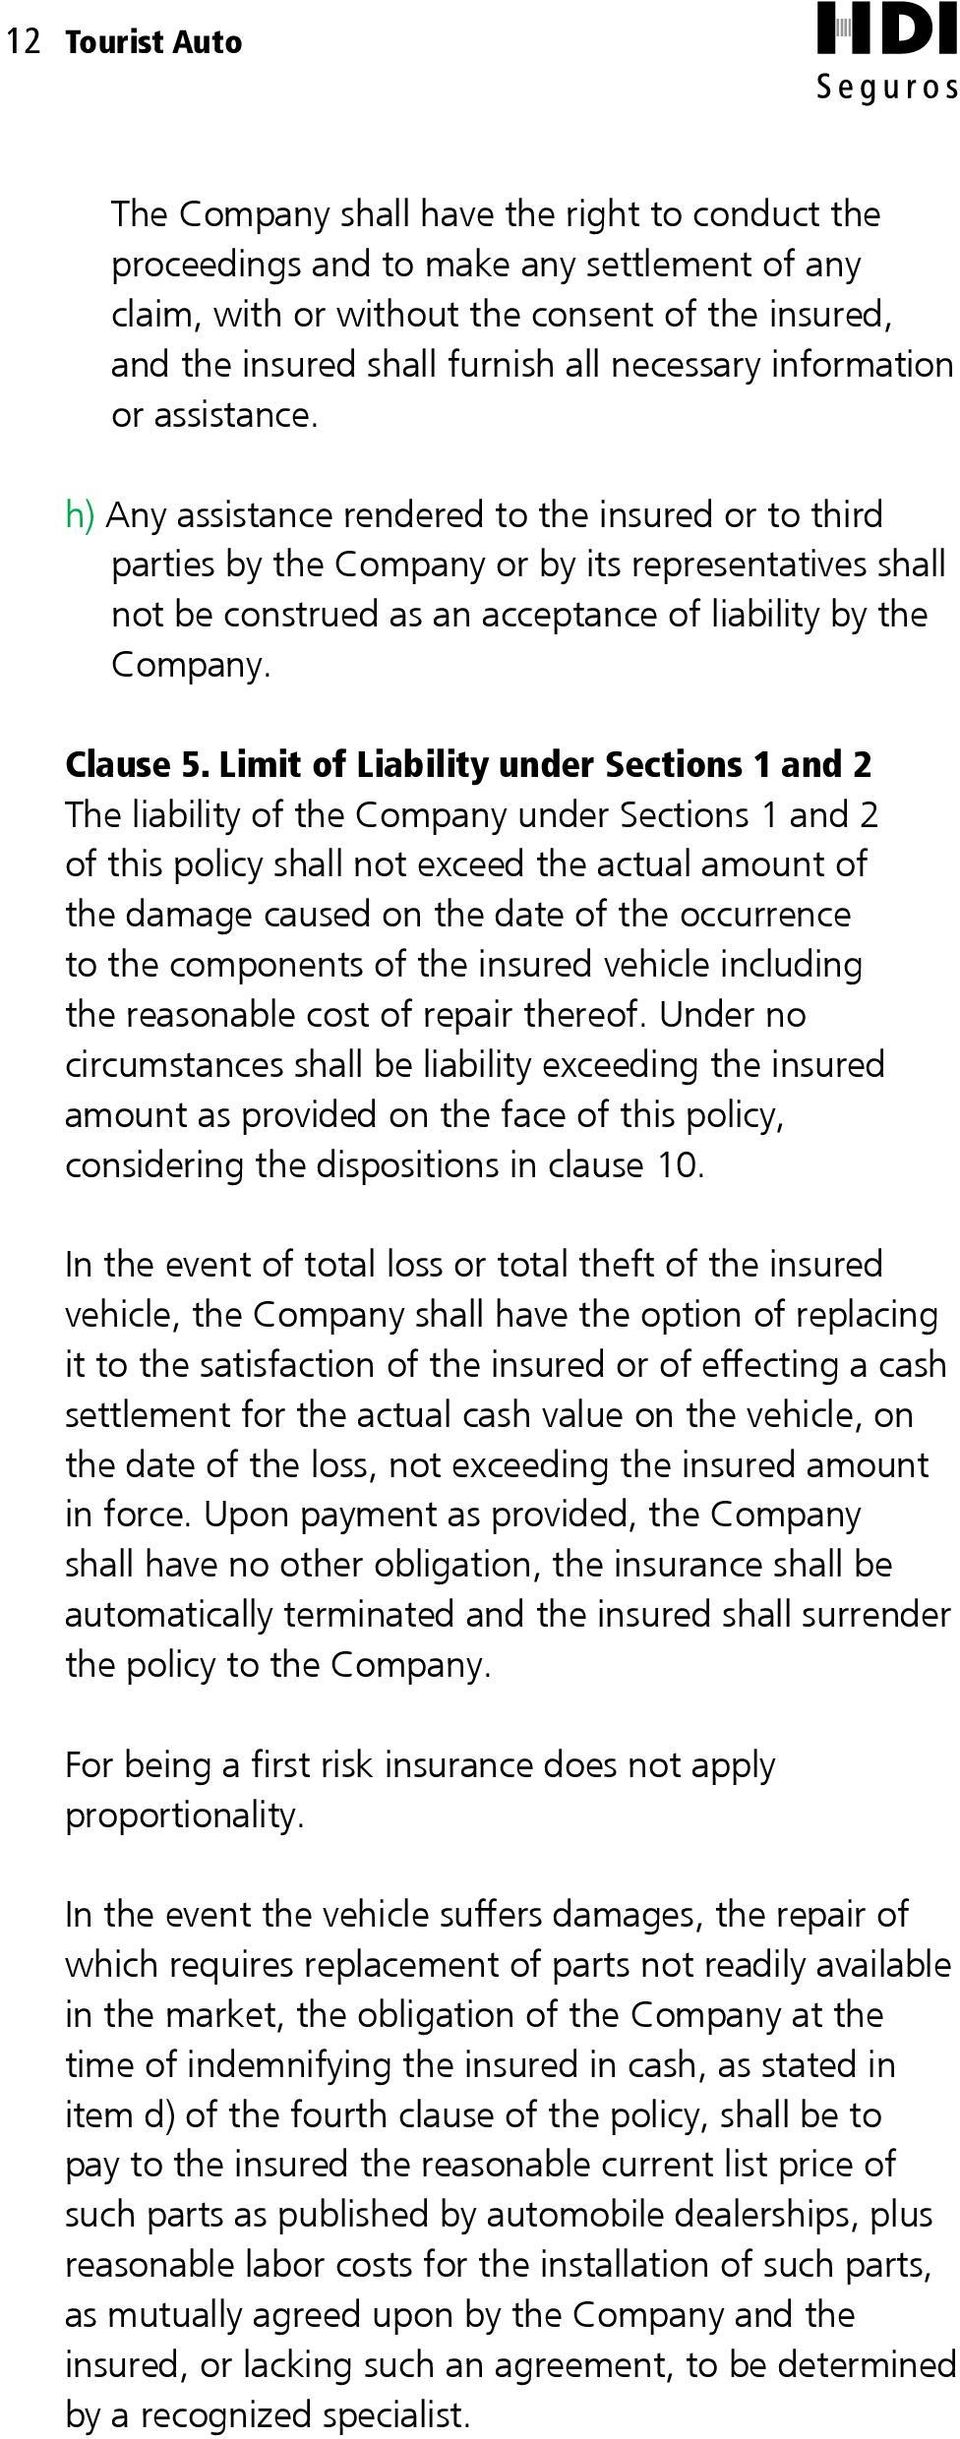 h) Any assistance rendered to the insured or to third parties by the Company or by its representatives shall not be construed as an acceptance of liability by the Company. Clause 5.